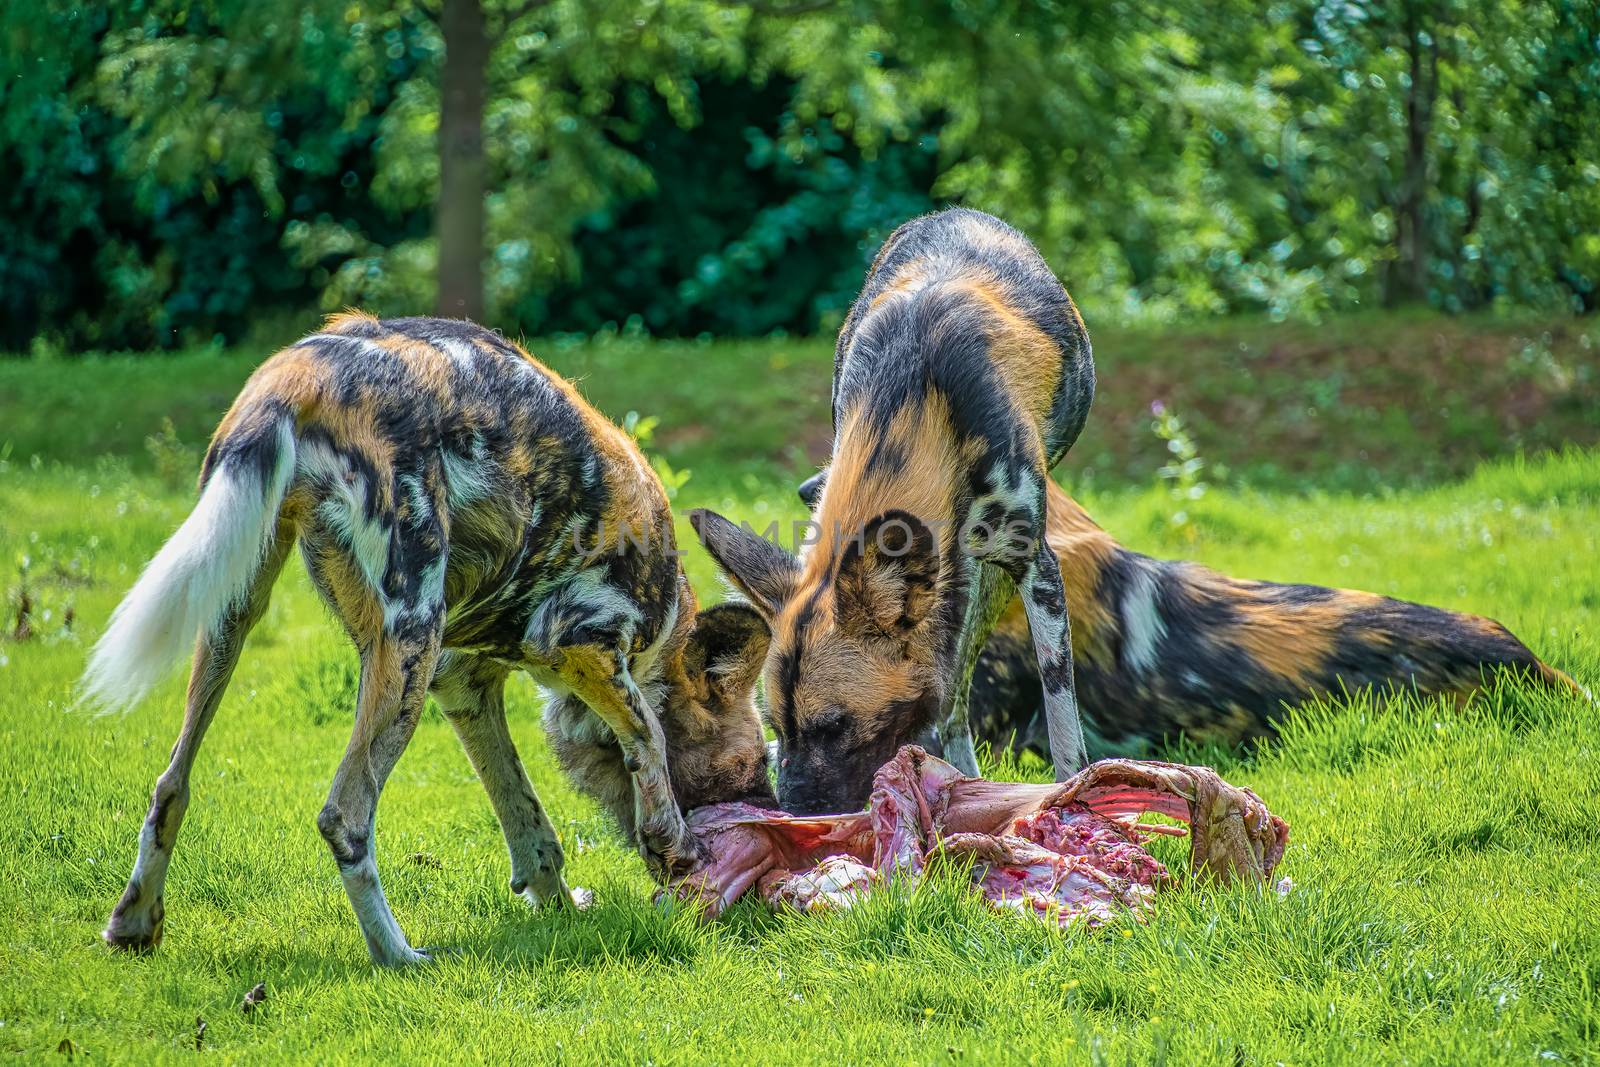 African painted dogs by Russell102